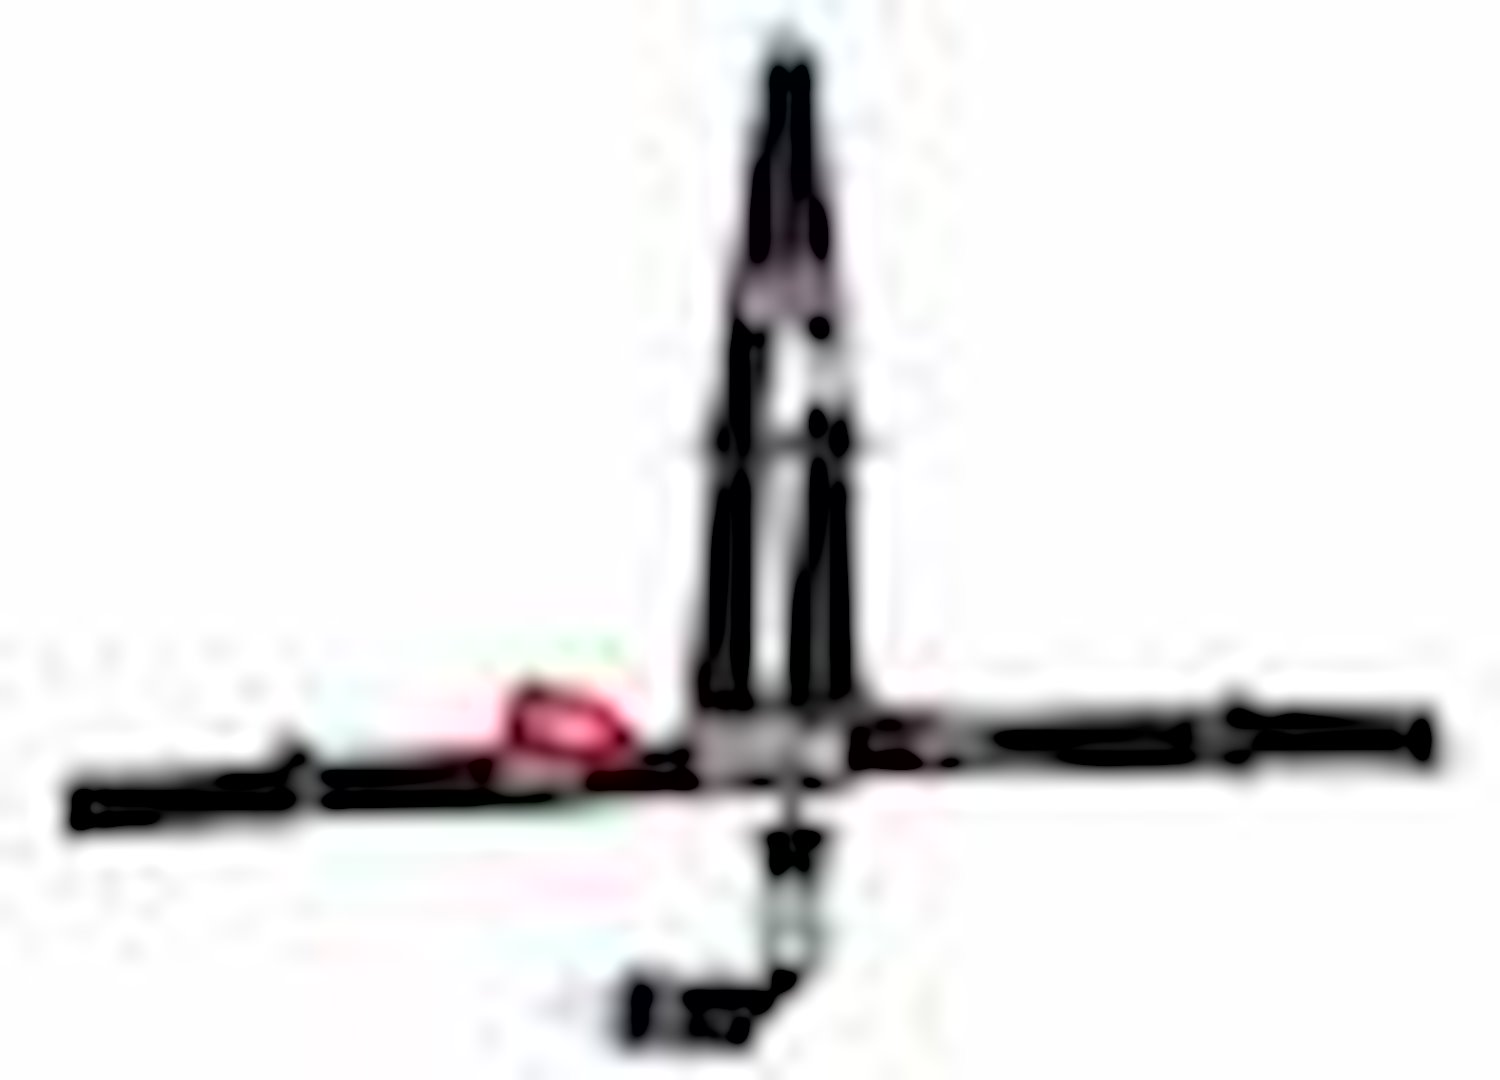 SFI 16.1 L&L HARNESS 2 PULL UP Lap Belt 2 Shoulder Harness V ROLL BAR Mount 2 DOUBLE Sub ALL SNAP ENDS w/STERNUM STRAP RED